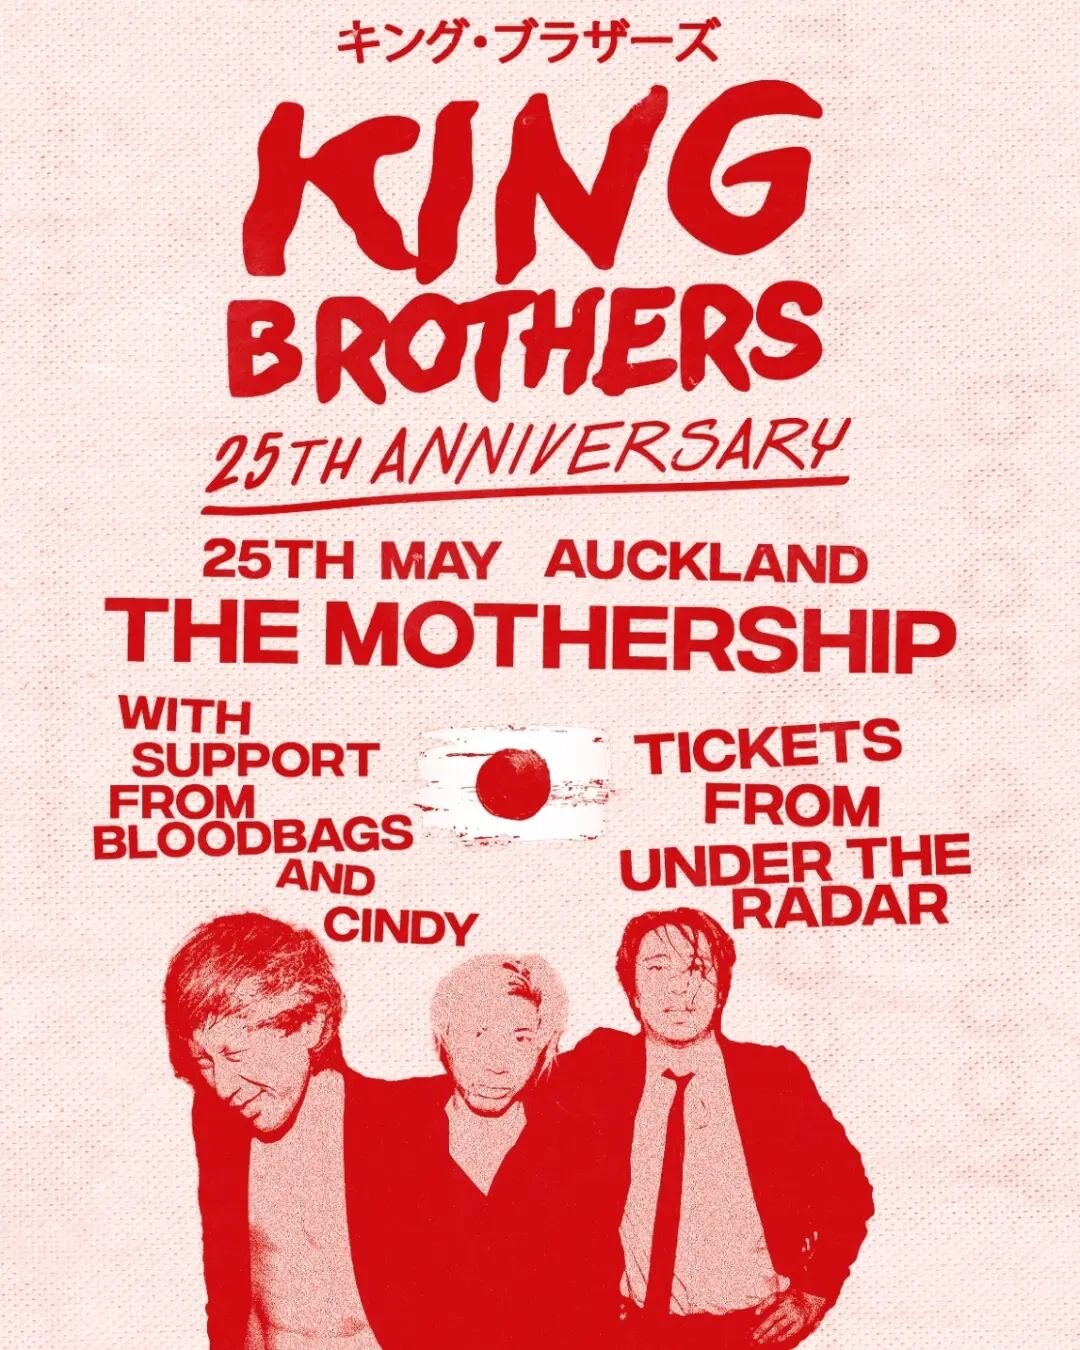 So very happy to have our favorites come down from Japan to Nz after a very long time. We are putting up a few  tickets online right now for earlybird prices. 

The Goats all the way from Nishinomiya Japan live in Auckland once again.
👑👑👑👑👑🤴🤴?